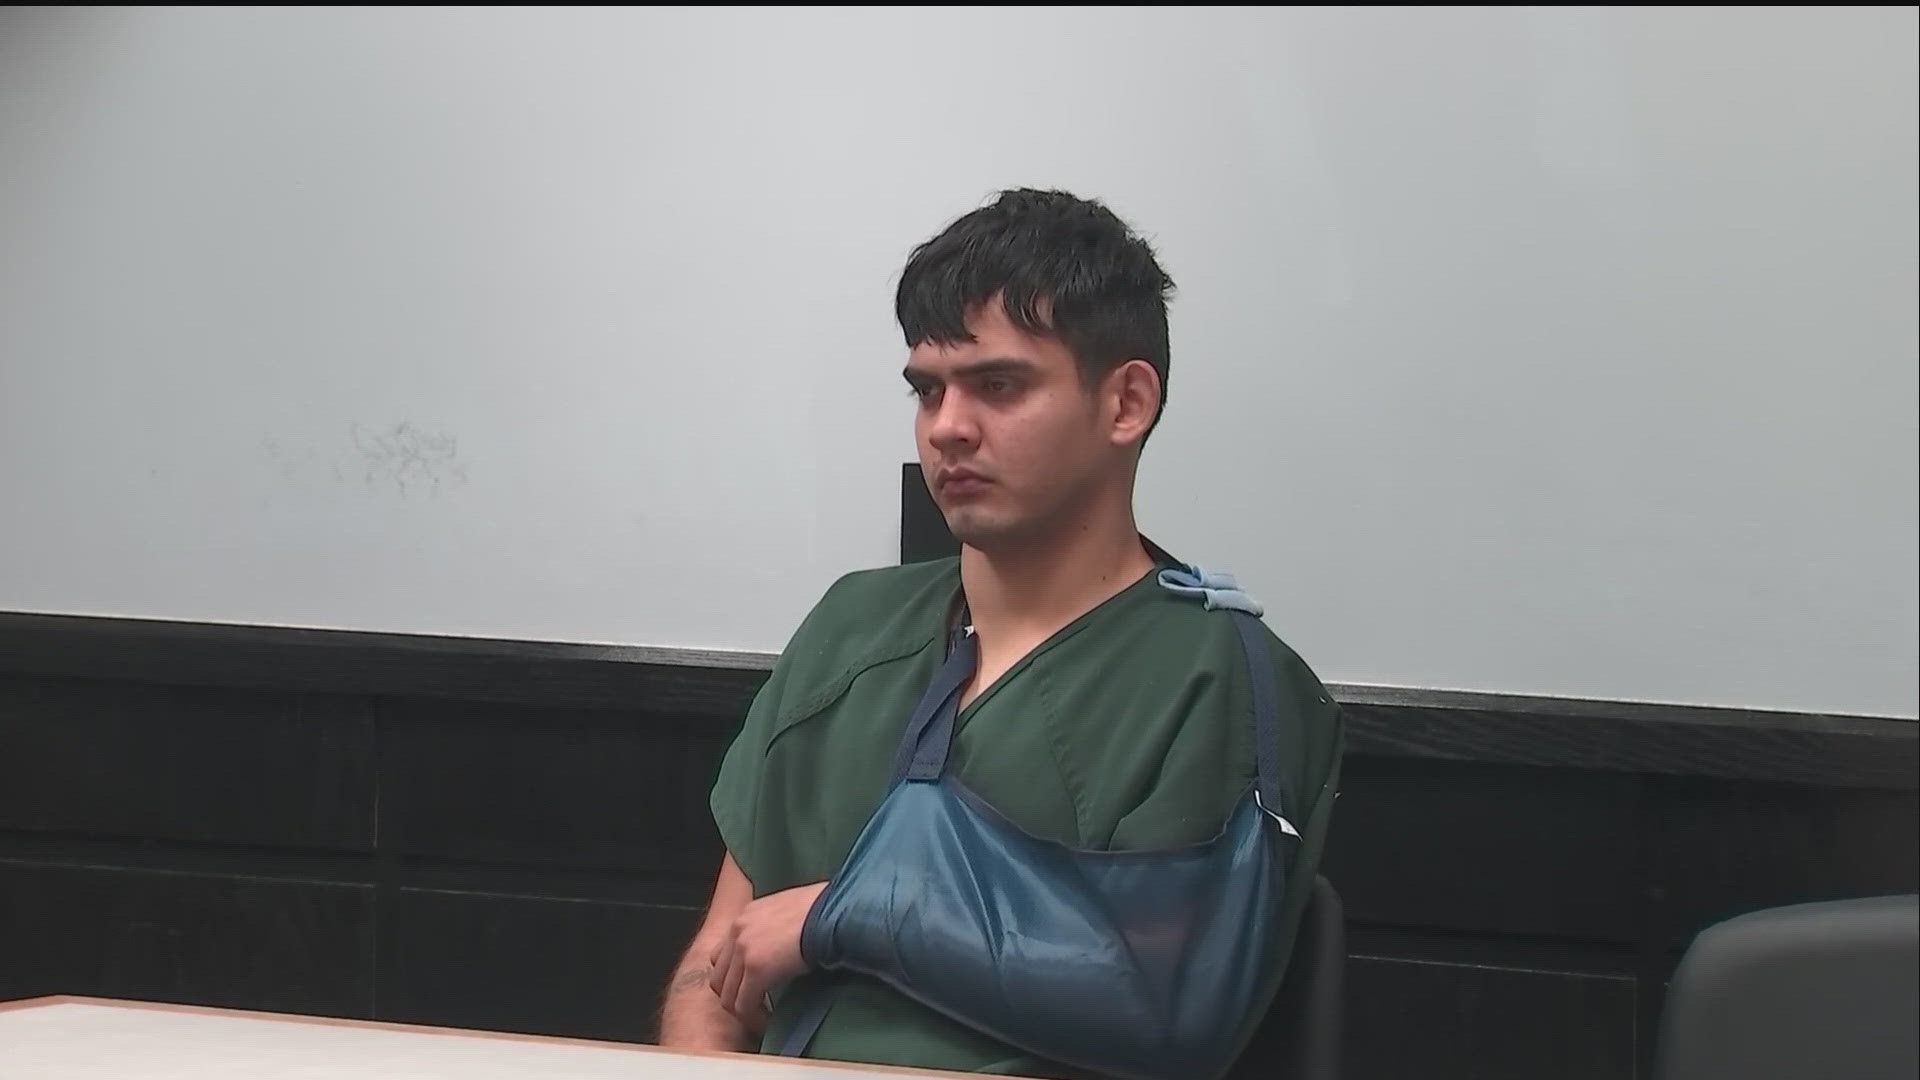 Gerson Ayala Rodriguez is accused in the death of GSP Trooper Jimmy Cenescar. The trooper died after he was trying to arrest a fleeing motorcycle driver on I-85.